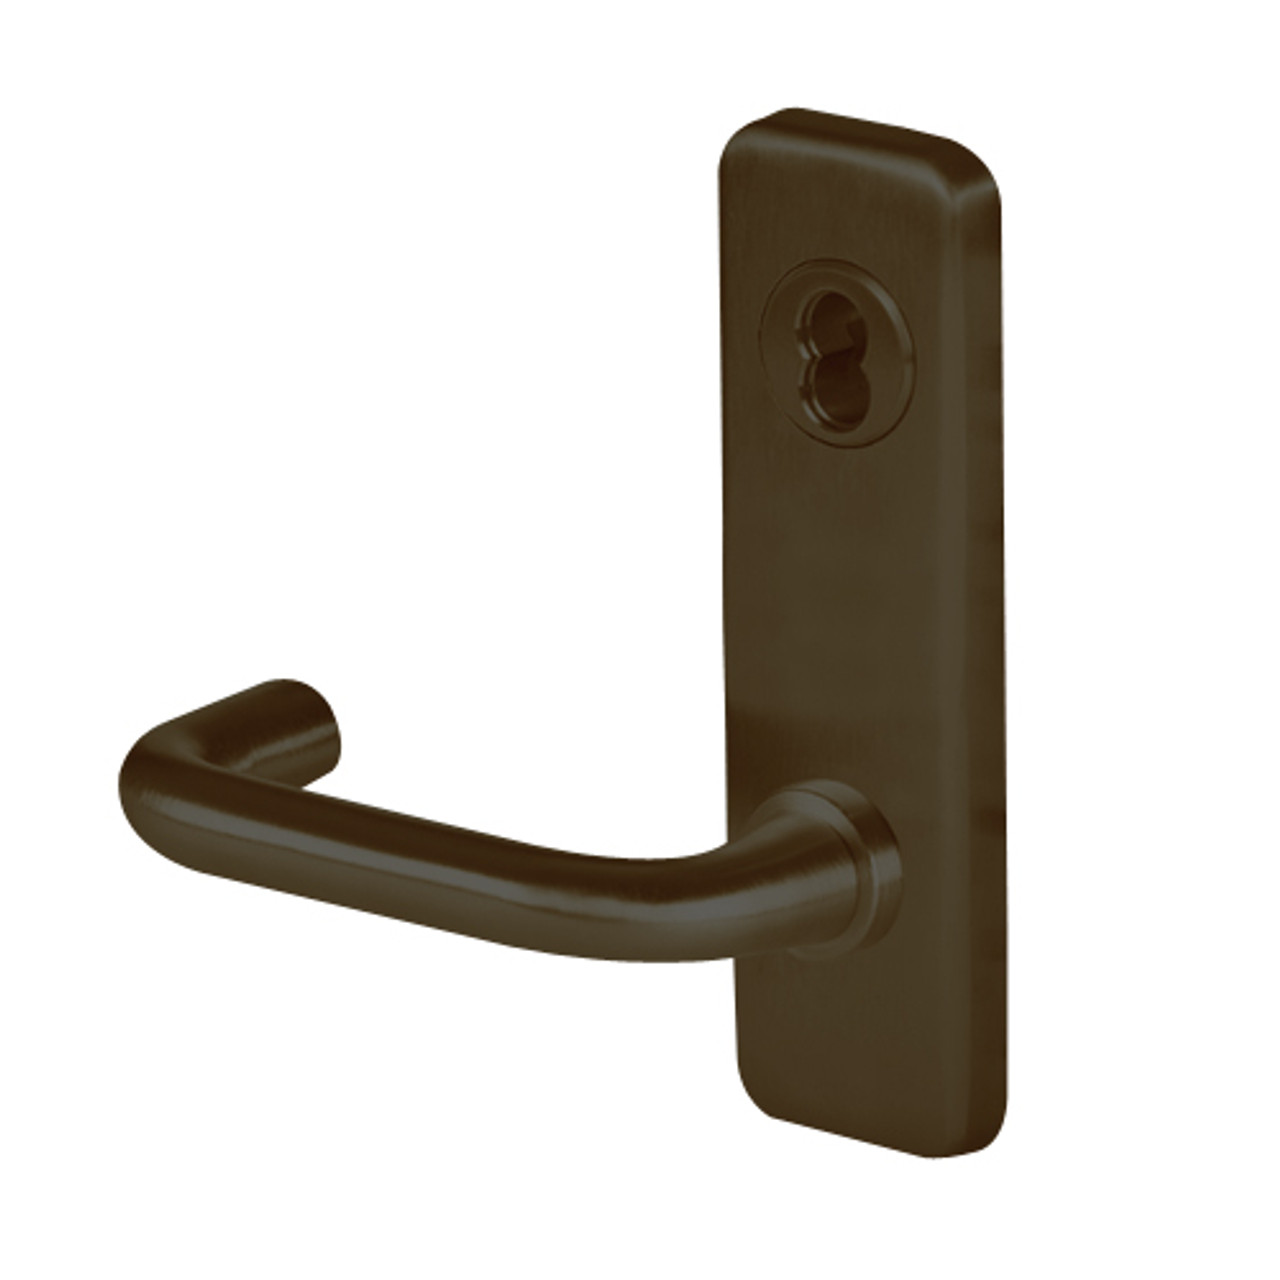 45H7B3J613 Best 40H Series Entrance with Deadbolt Heavy Duty Mortise Lever Lock with Solid Tube Return Style in Oil Rubbed Bronze